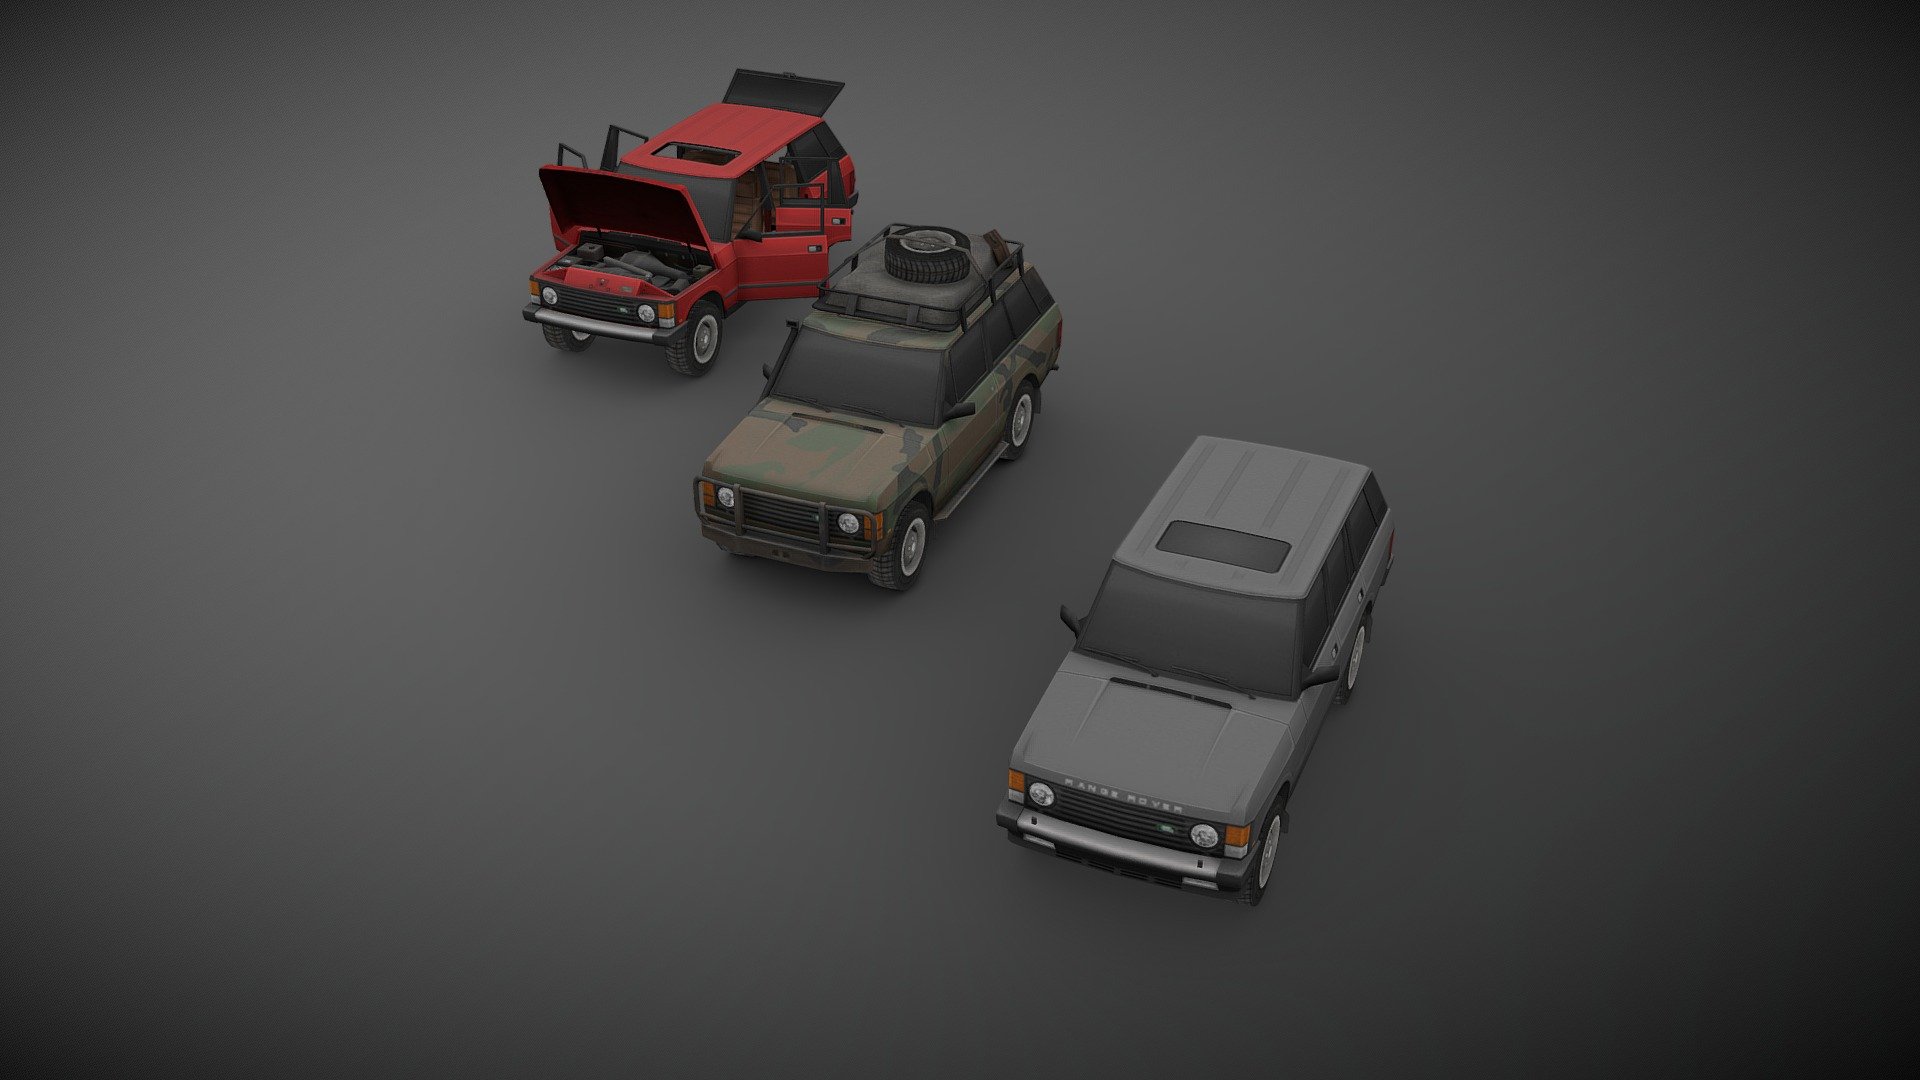 A remake of a 1991 RANGE ROVER Classic I’ve made for project ZOMBOID a few years ago, low poly but with a high detail texture, optimized for game engine. This version is not a 100% true to the original since there are some compromises I’ve had to make to present it here.

You can find the actual version in project ZOMBOID STEAM Workshop 3d model